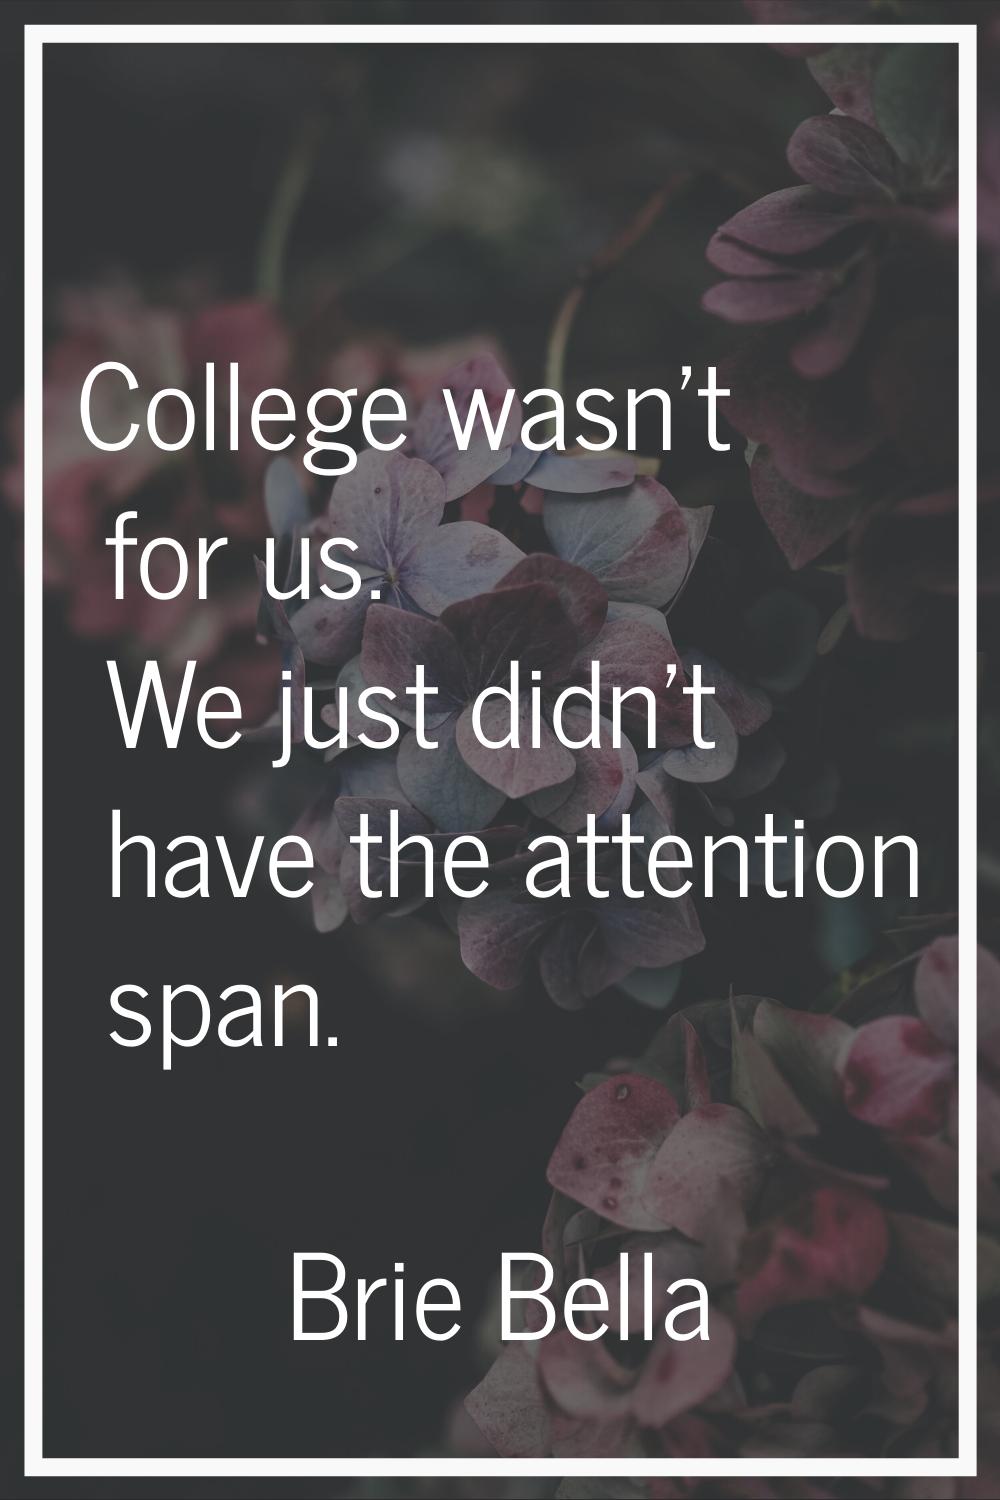 College wasn't for us. We just didn't have the attention span.